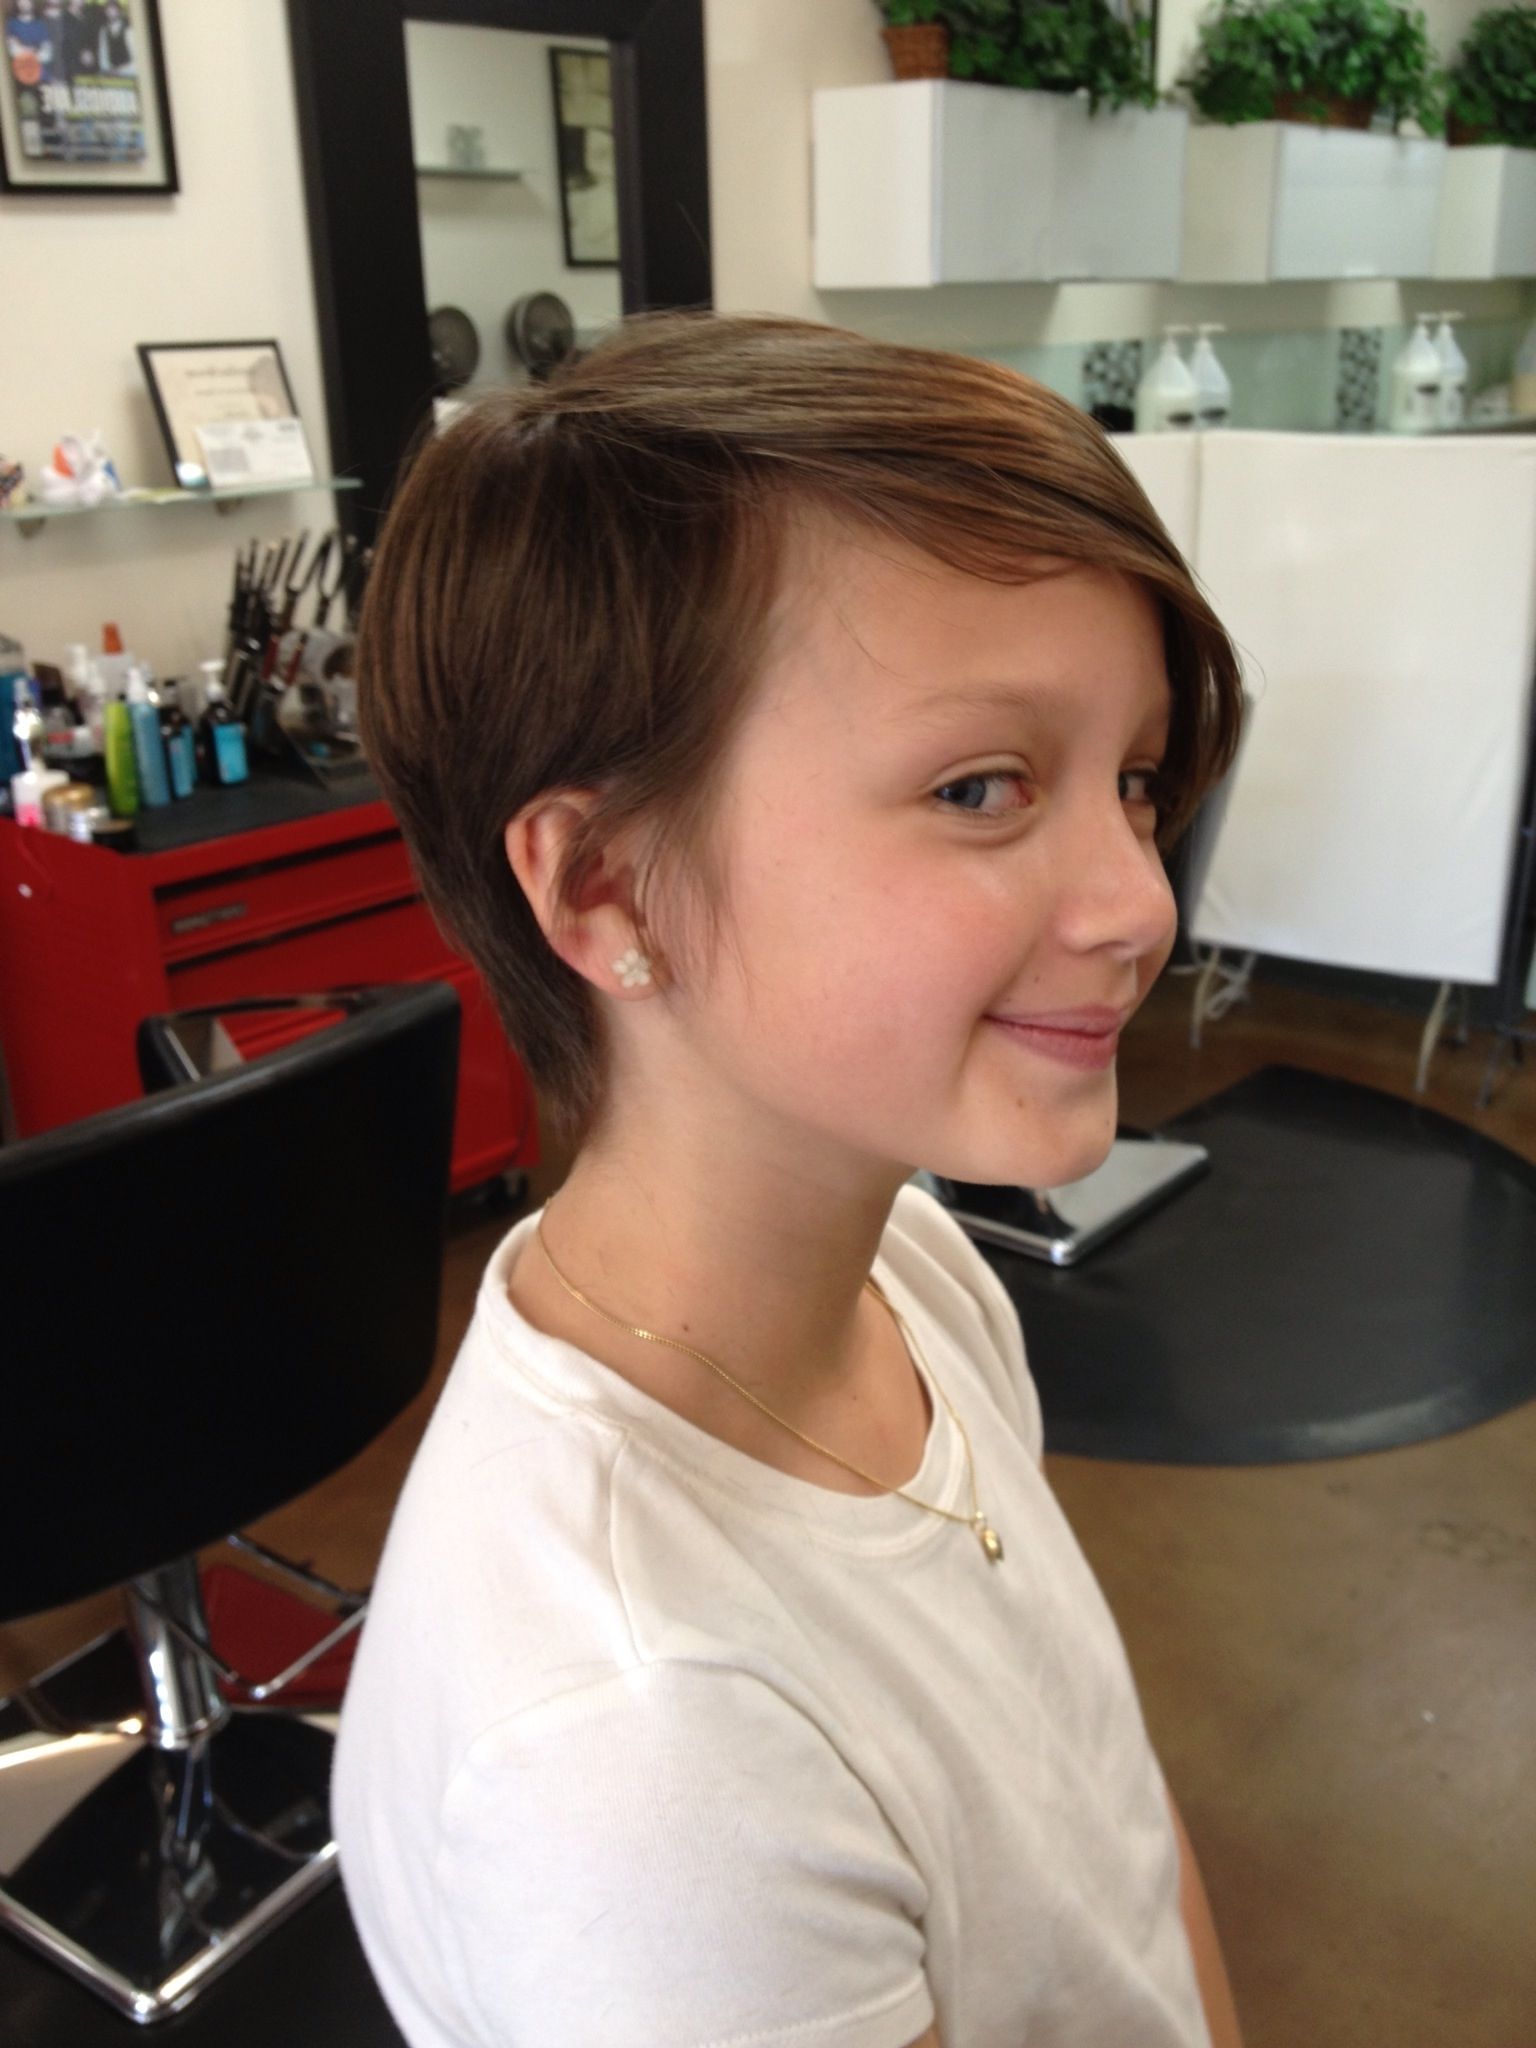 Cool Pixie Cut For A Tween. | Hairstyles Short/pixie | Pinterest For Best And Newest Little Girl Pixie Hairstyles (Photo 10 of 15)